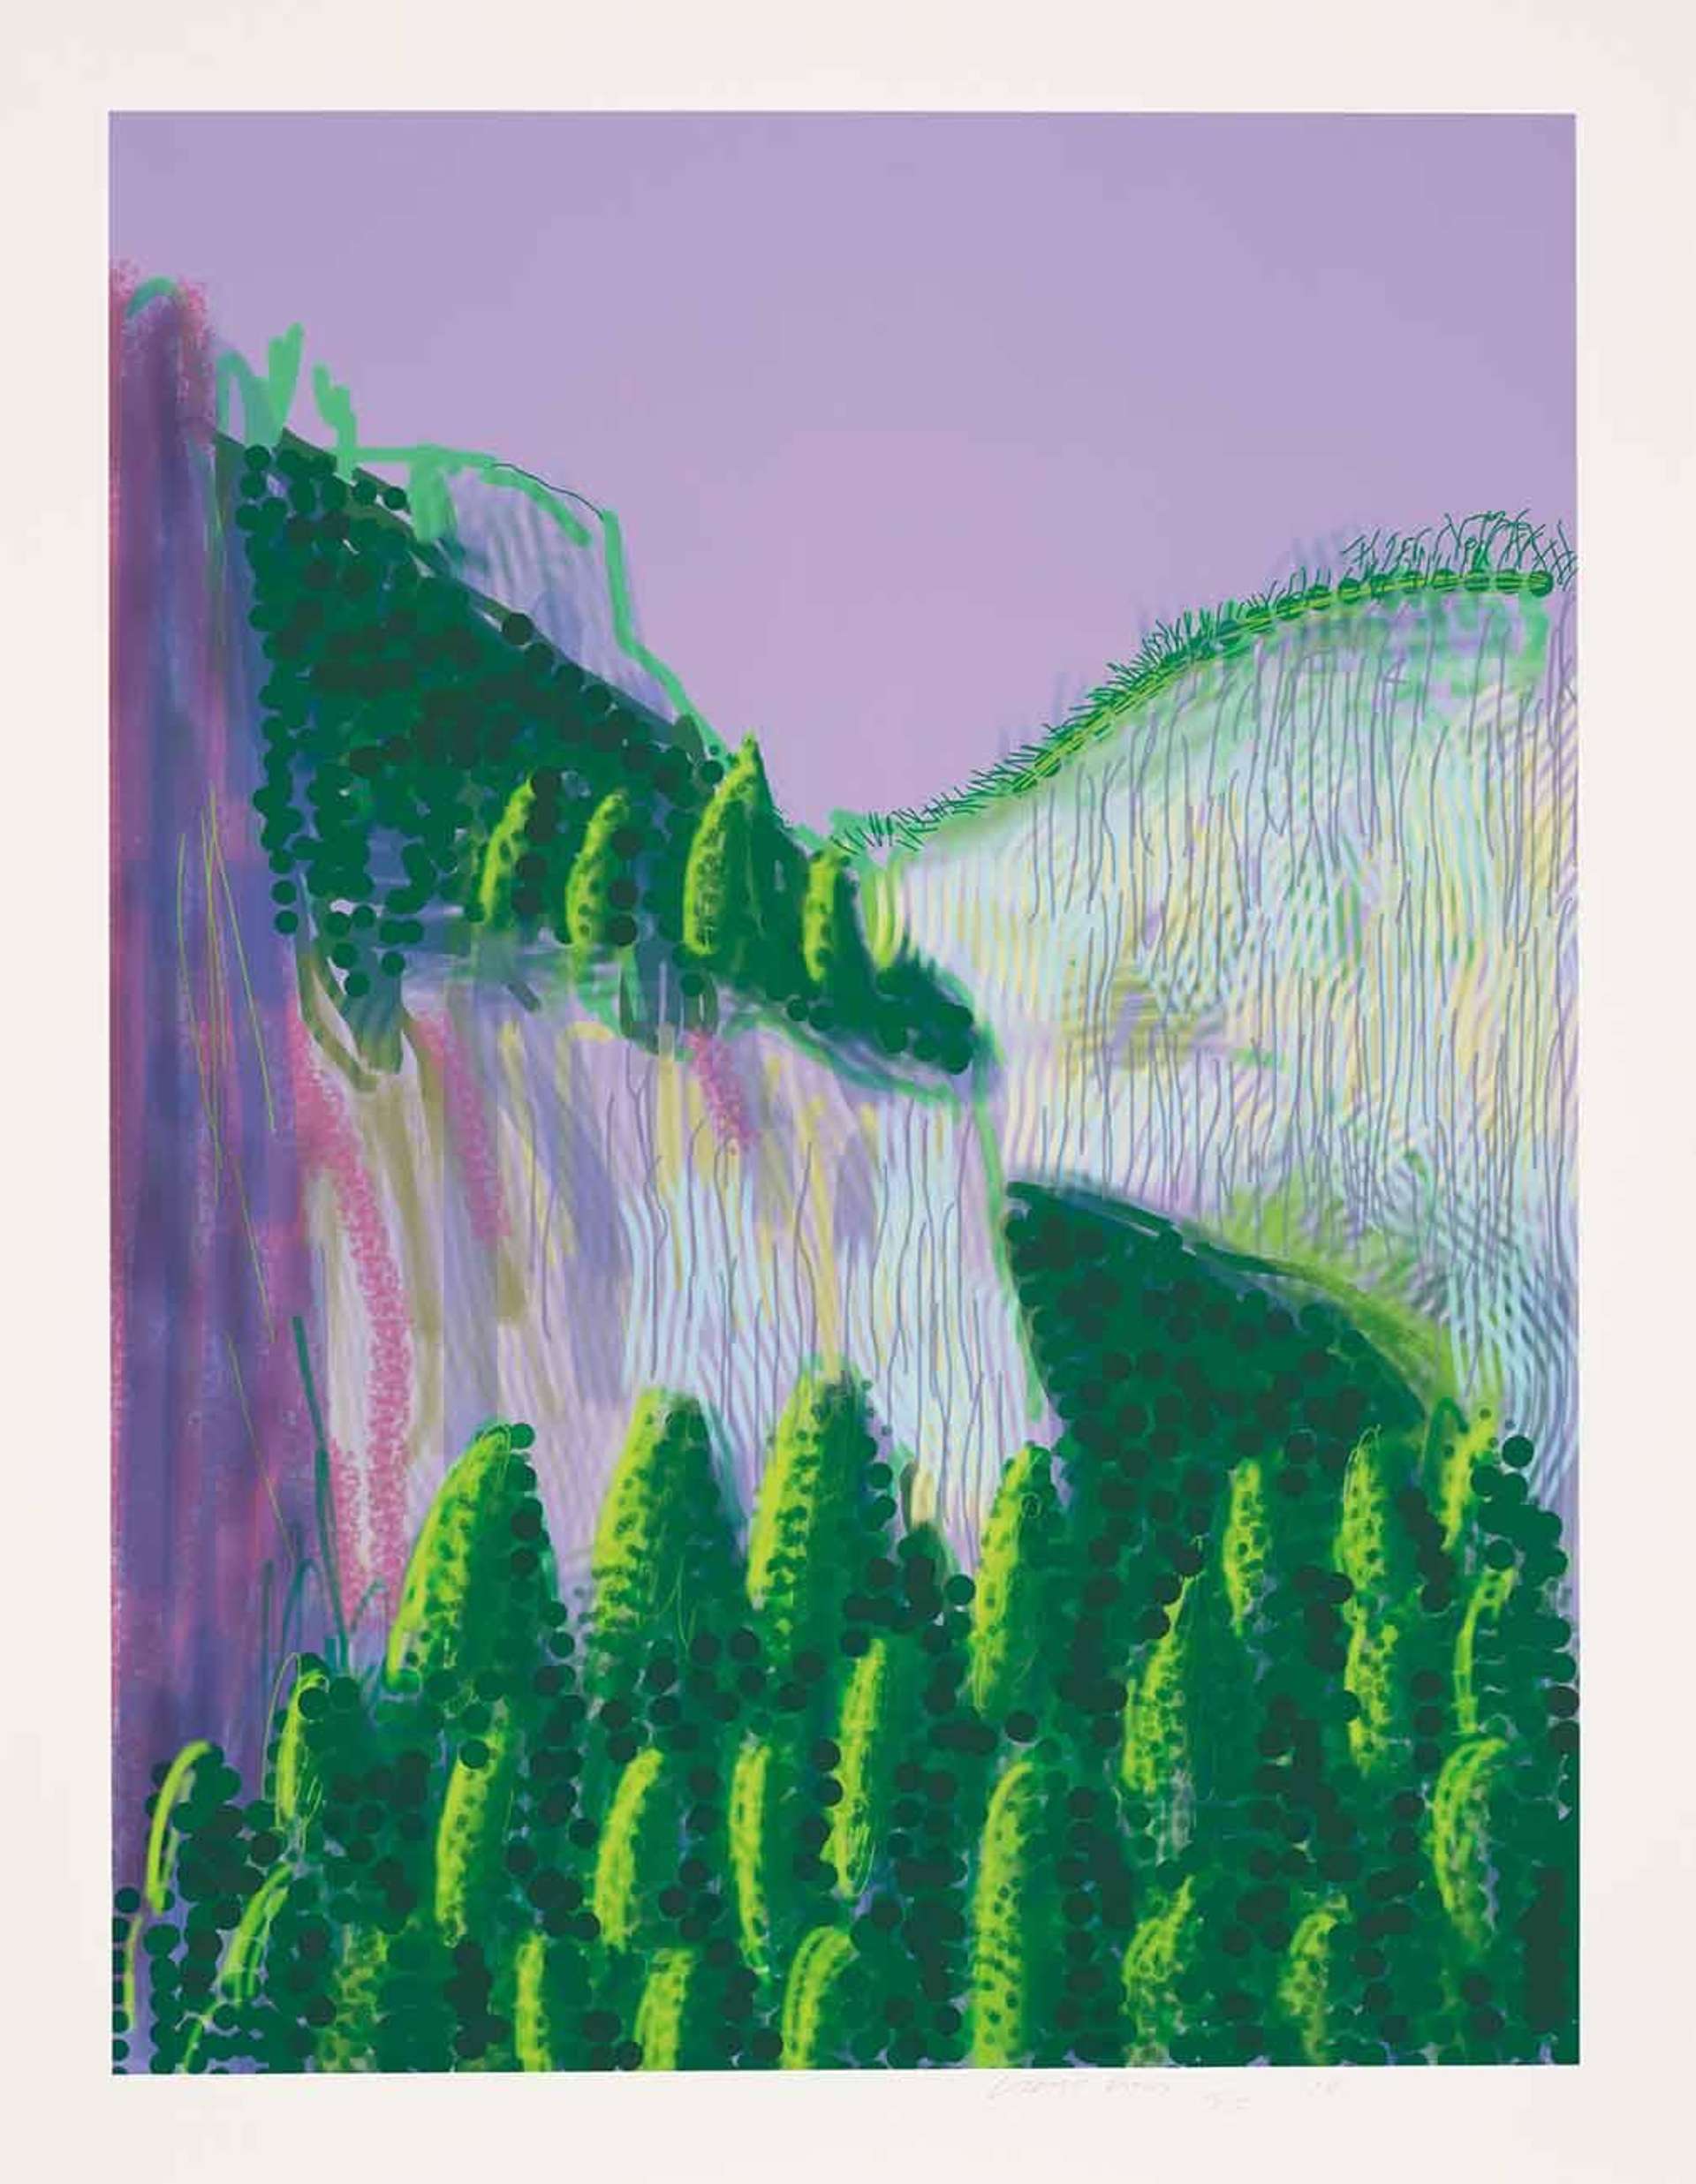 A panoramic view of Yosemite by David Hockney. Trees can be seen growing on rocky outcrops, tinted in tones of purple.